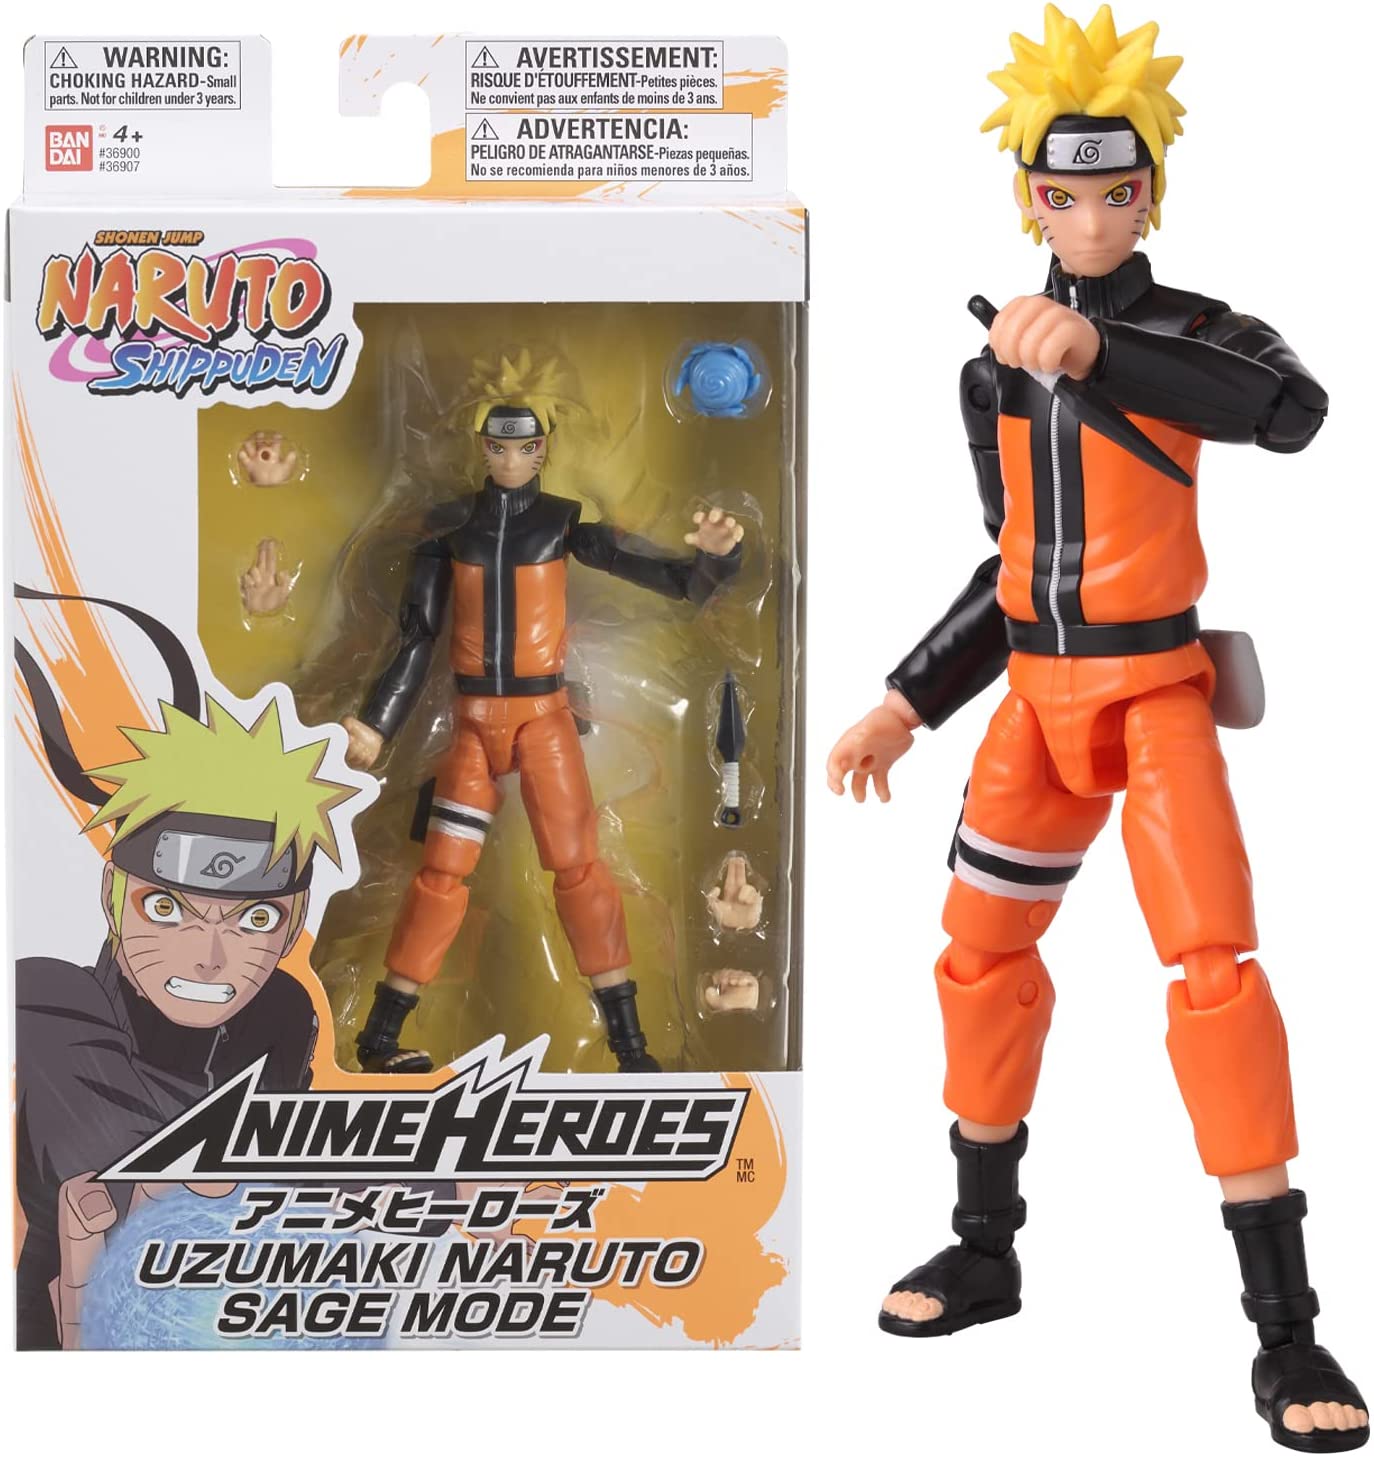 Buy Online Latest Premium Quality Ah Naruto Sage Mode - Buy Tech Today